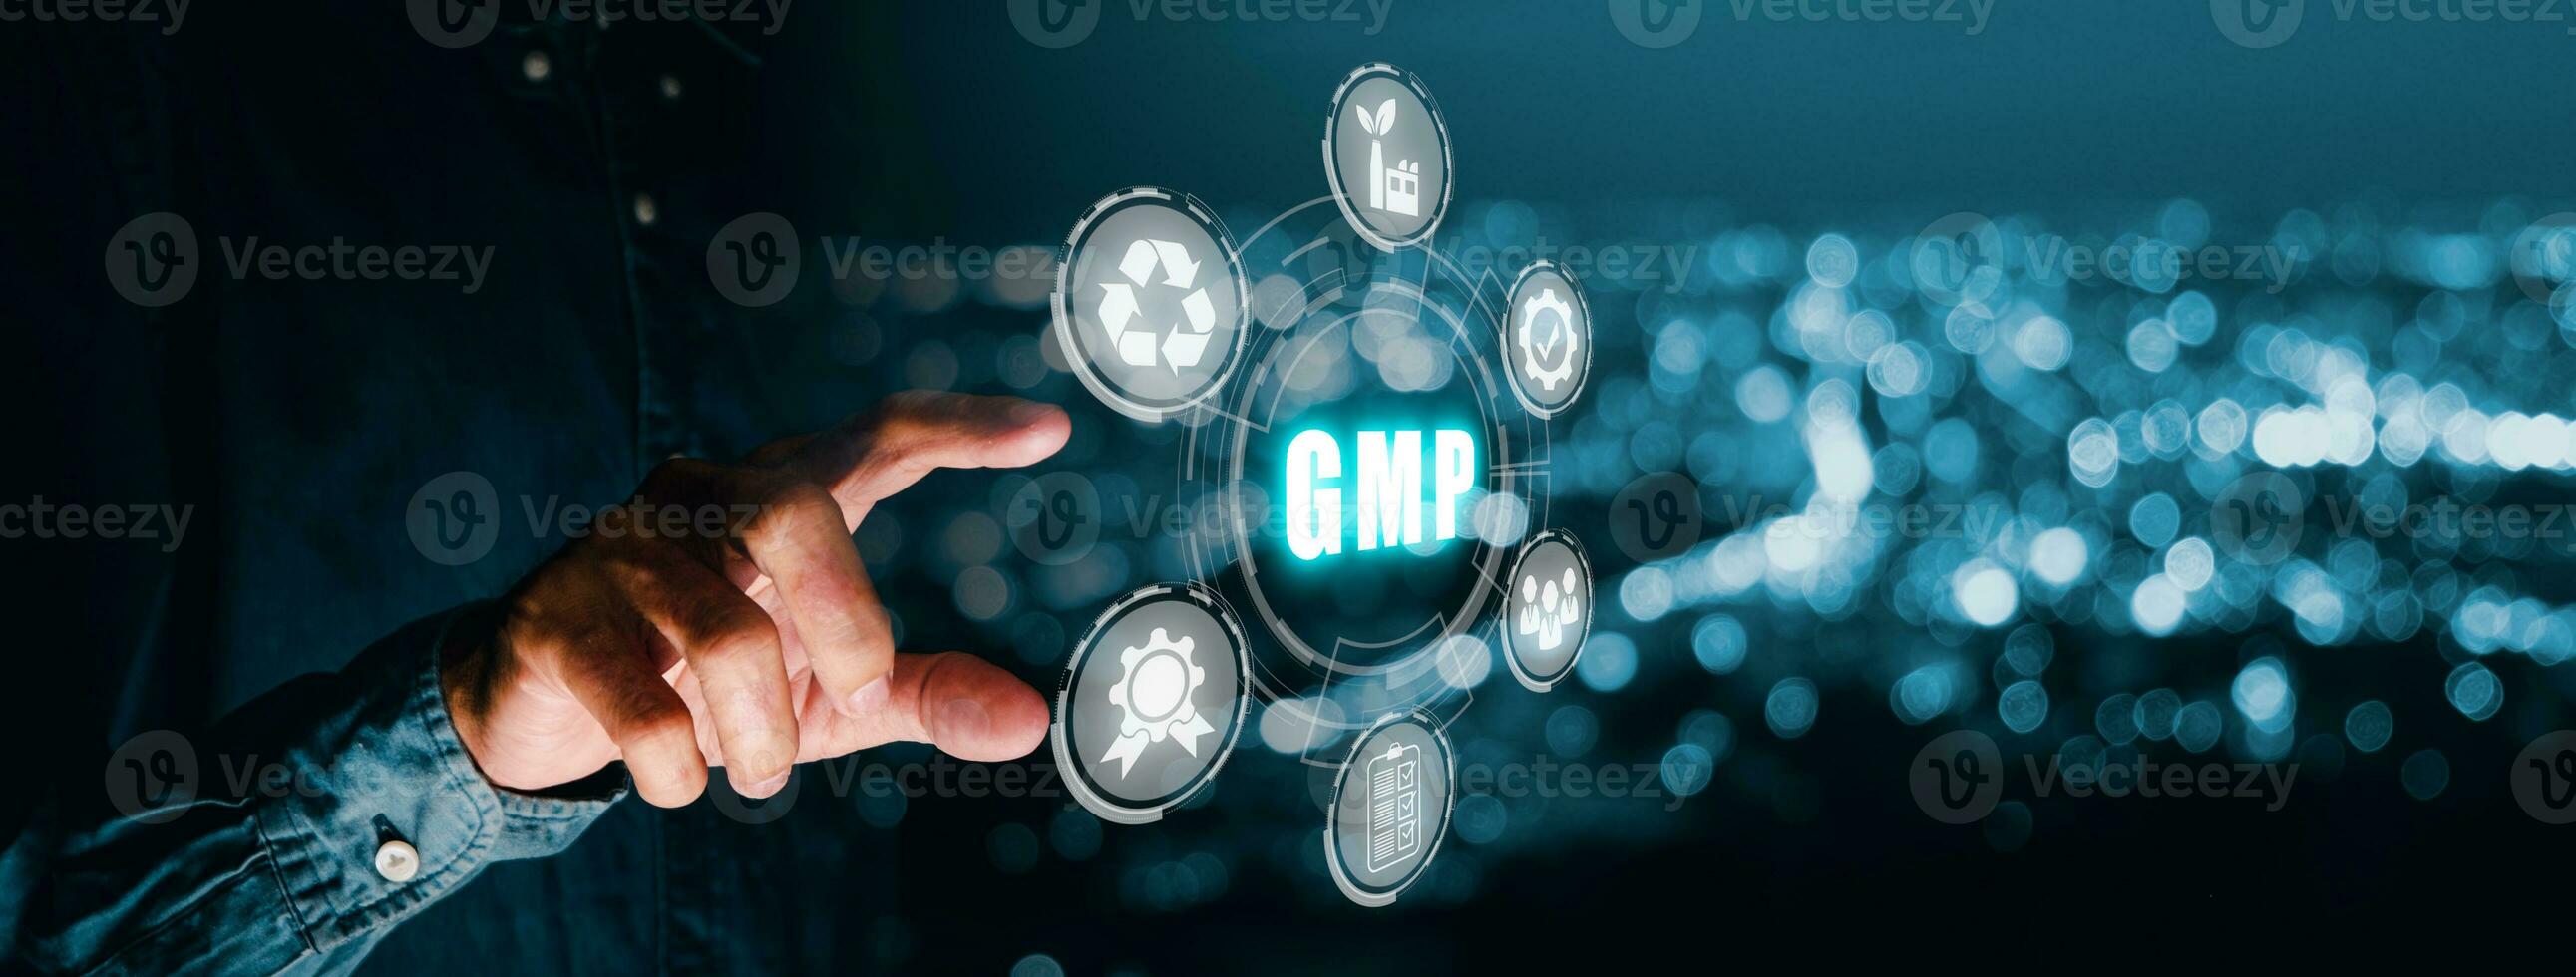 Good Manufacturing Practice Medical Pharmacy, Person hand touching VR screen GMP icon background, Industrial Practices Quality Assurance Education. photo